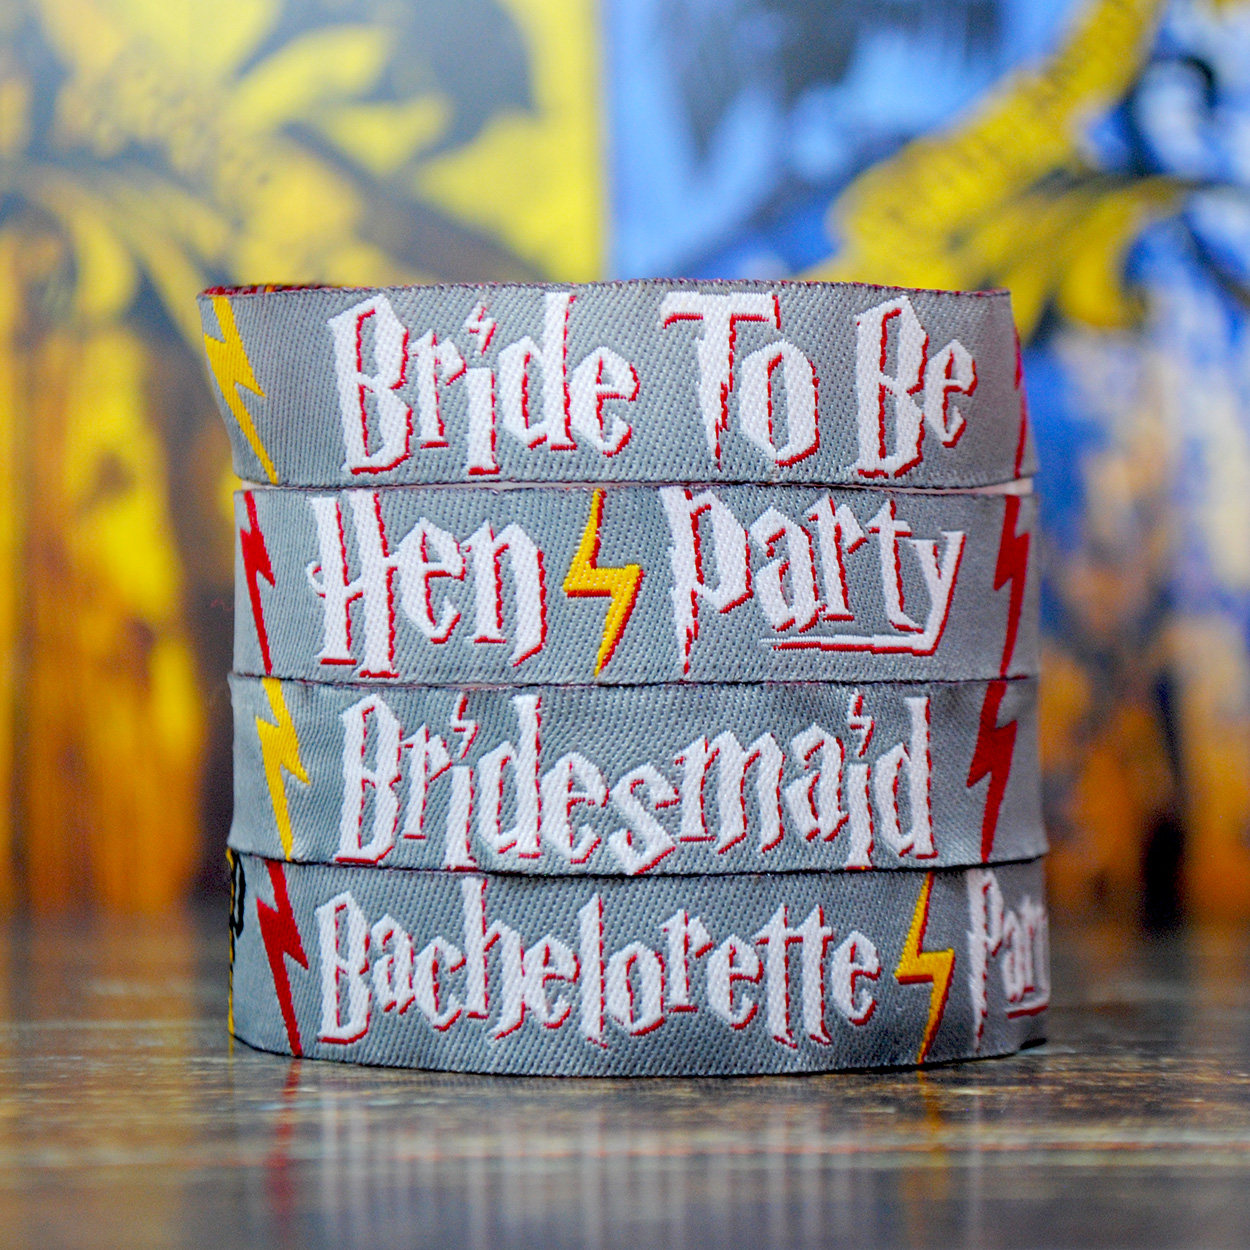 harry potter hen party themed wristbands